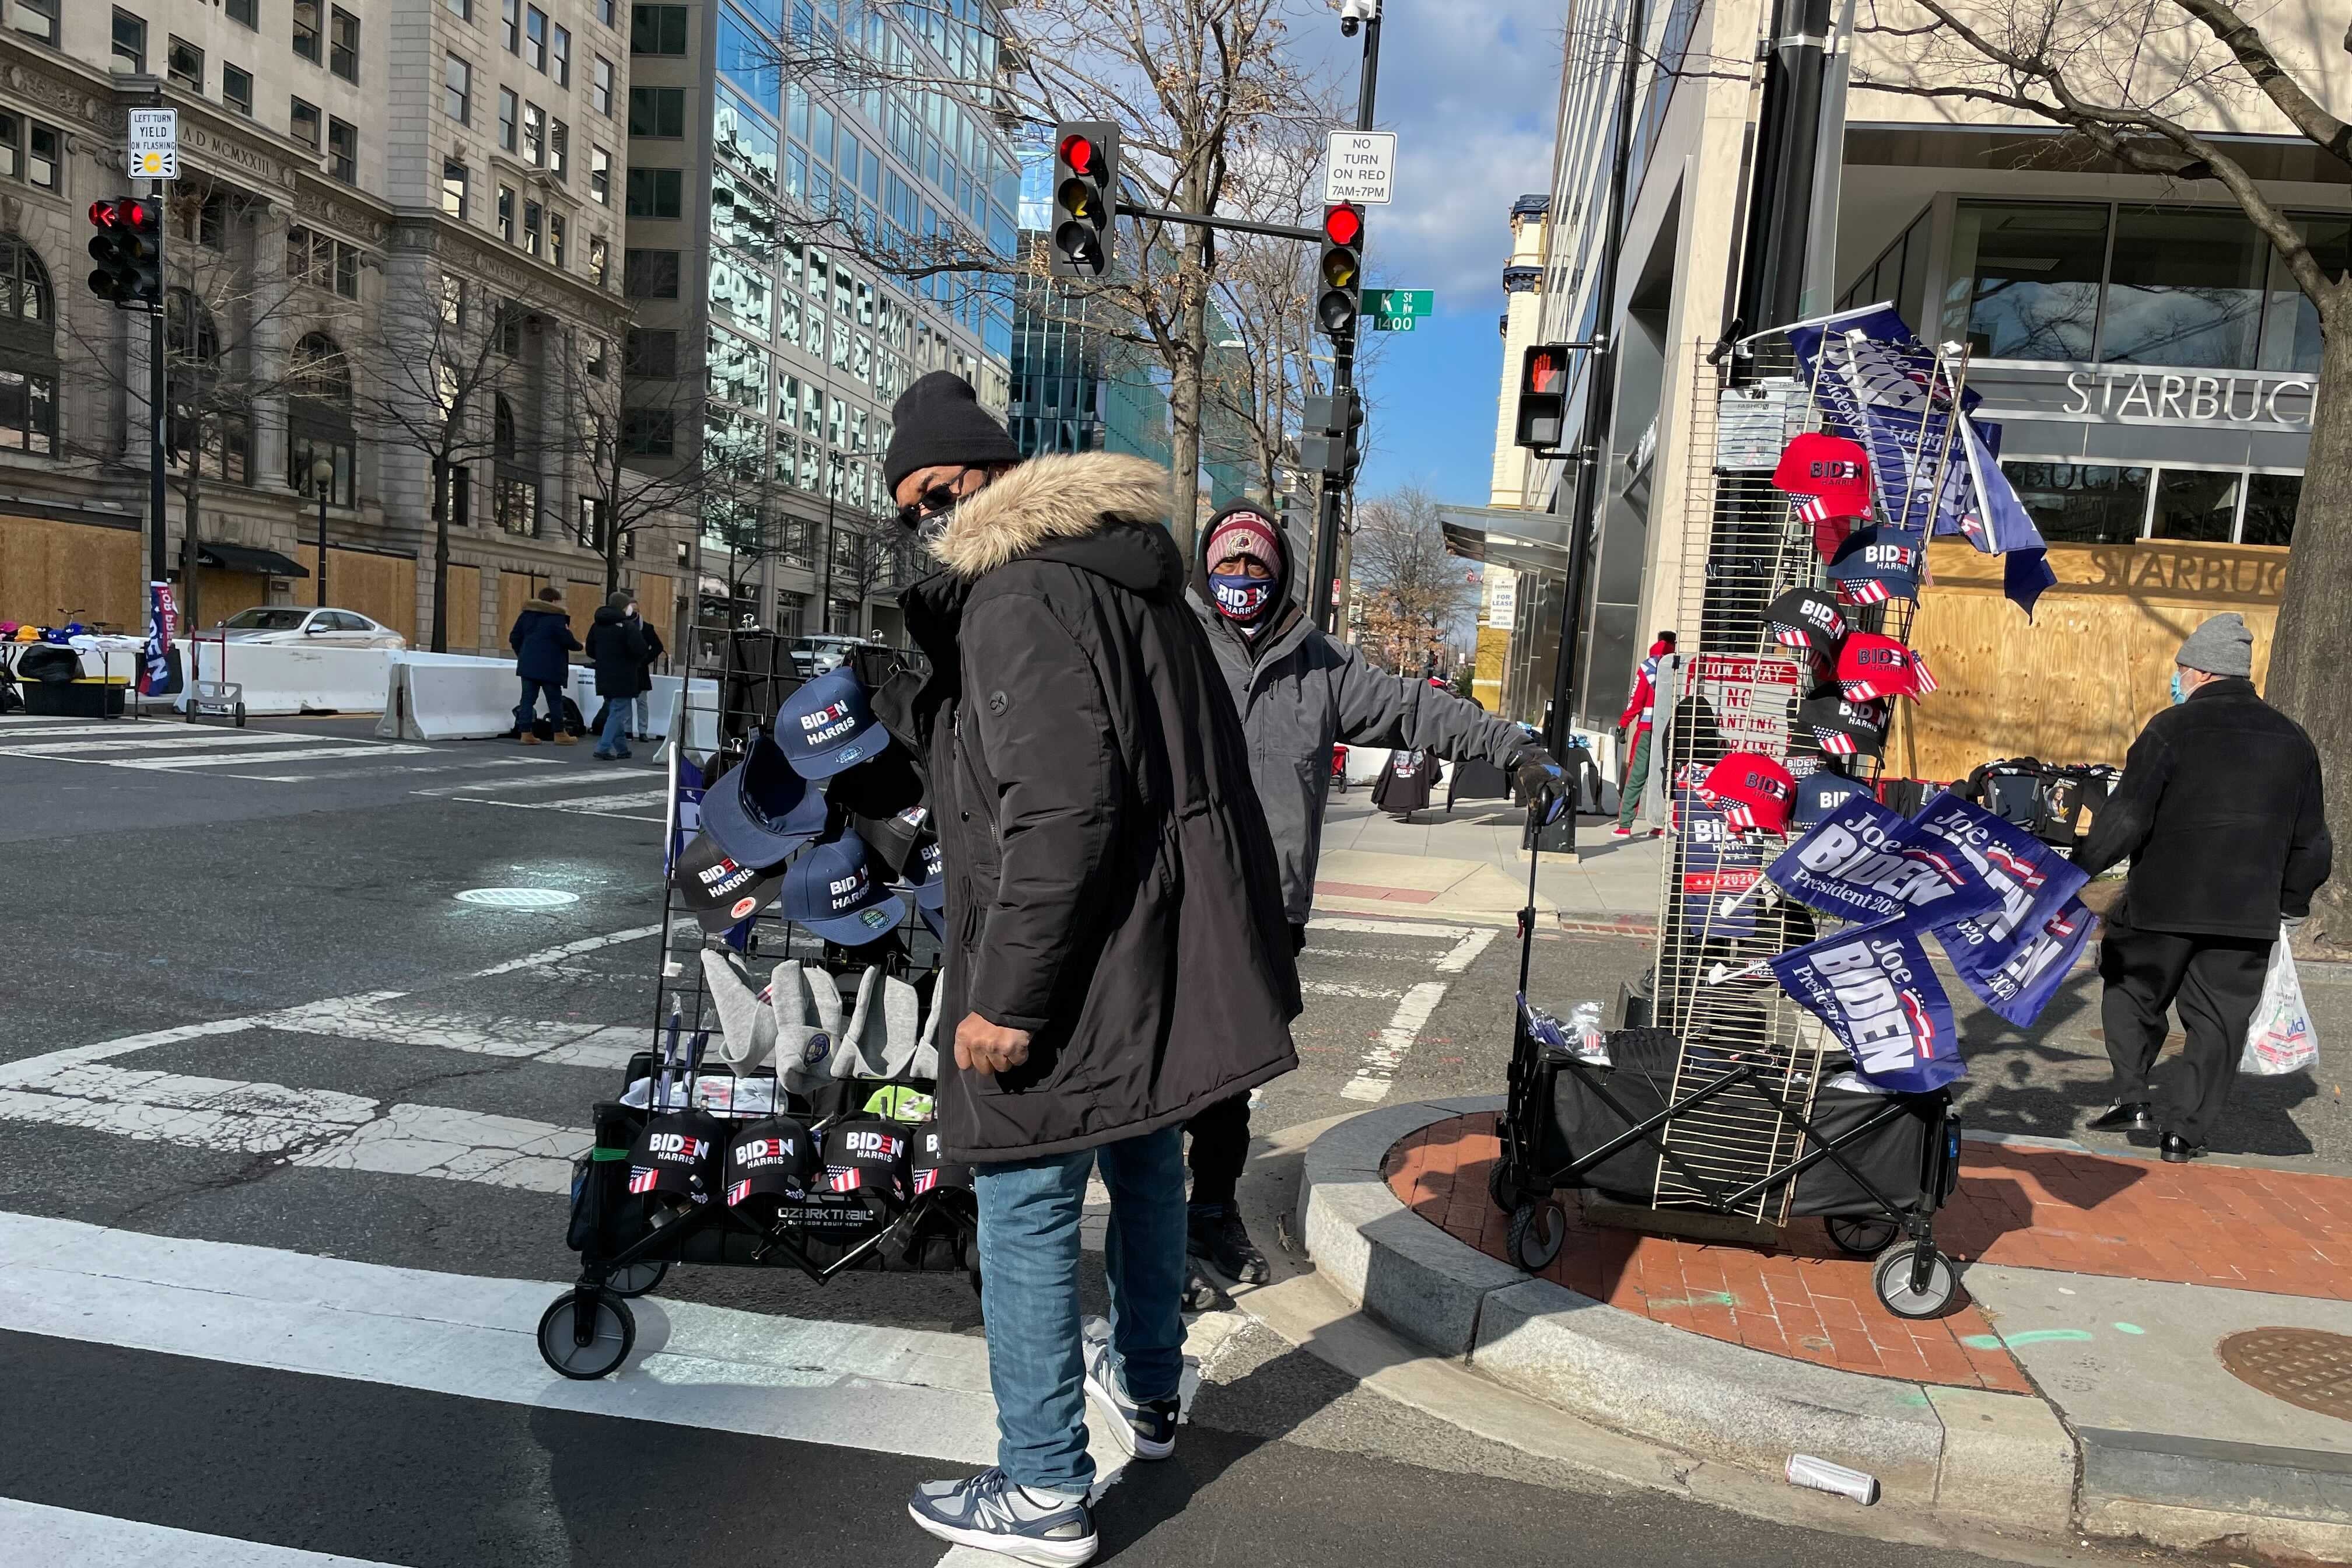 A street vendor in D.C. with carts full of Biden-Harris flags, hats, and other memorabilia